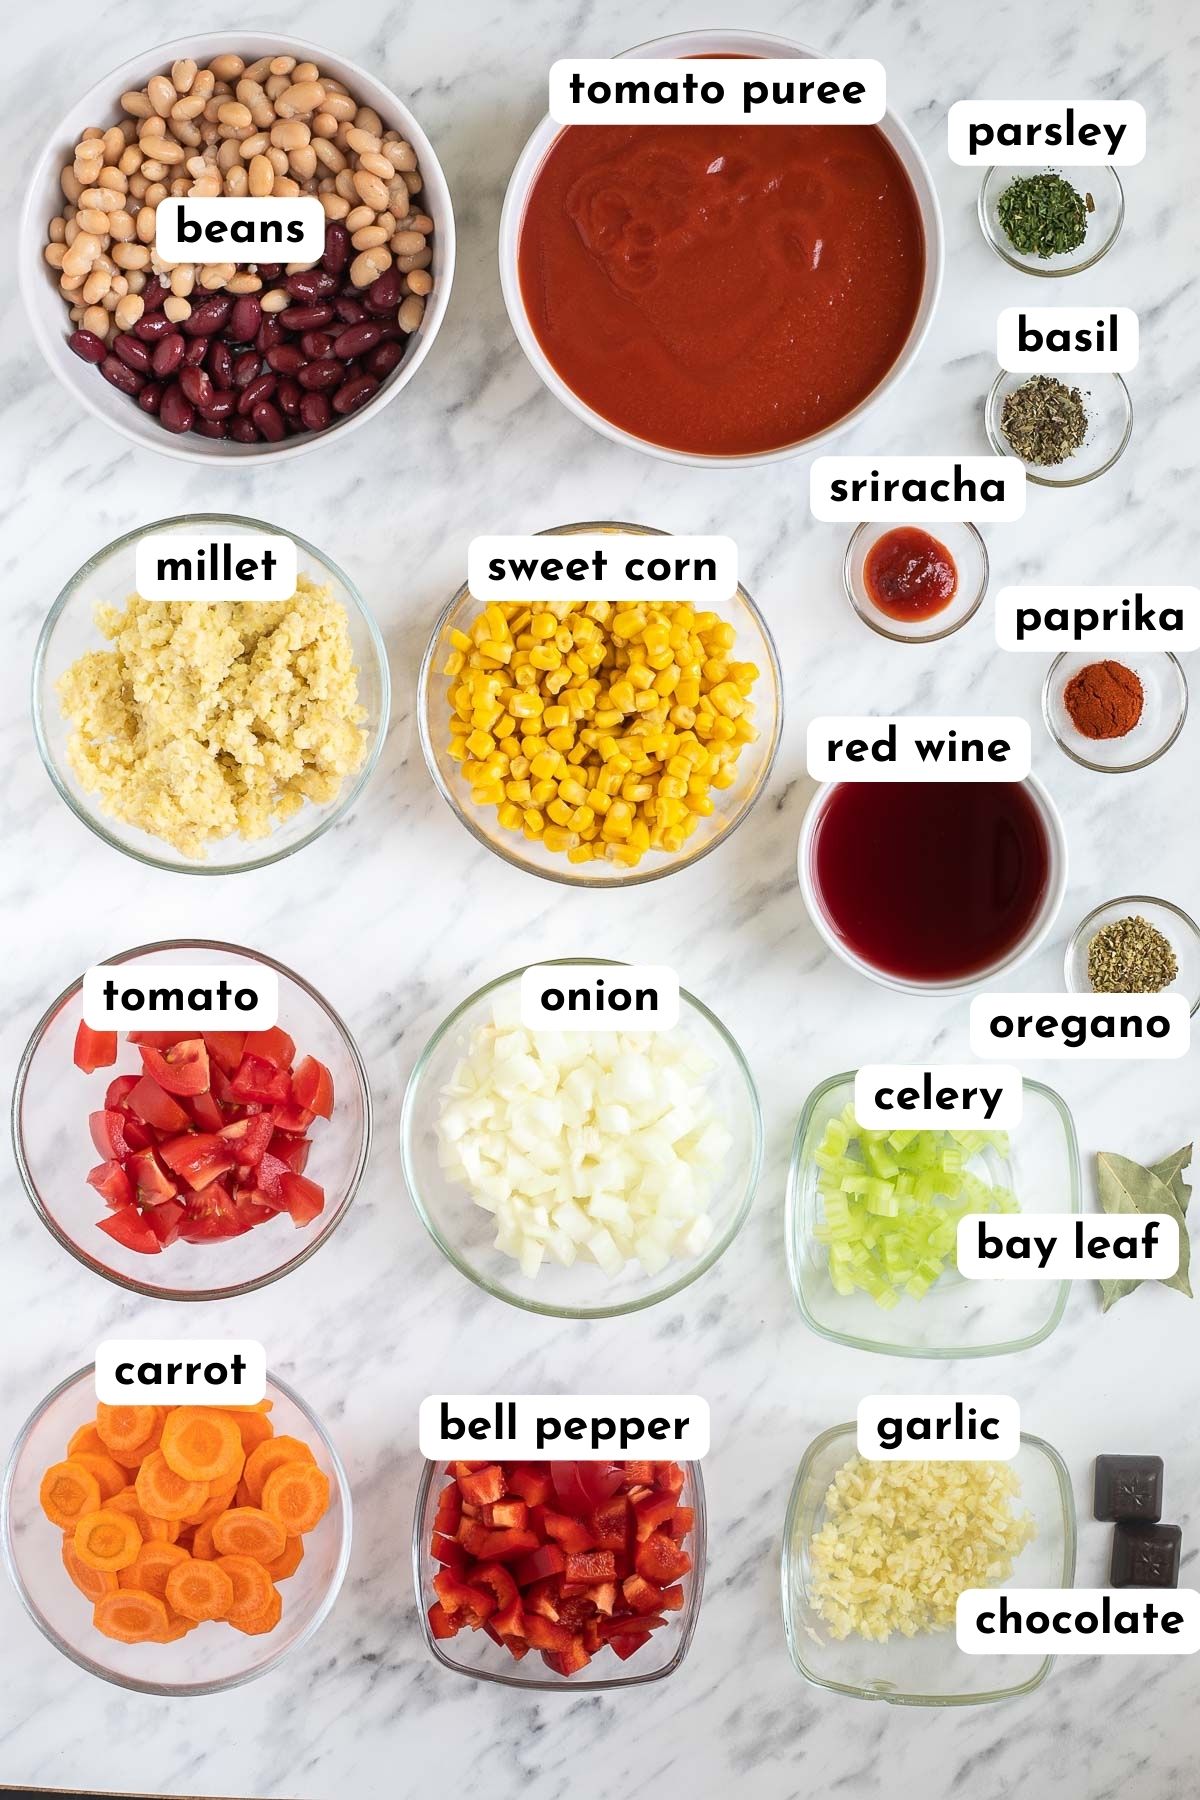 Ingredients of vegan chili in small bowls like beans, corn, millet, tomato puree, chopped tomato, onion, garlic, carrot, red pepper, red wine and different spices.